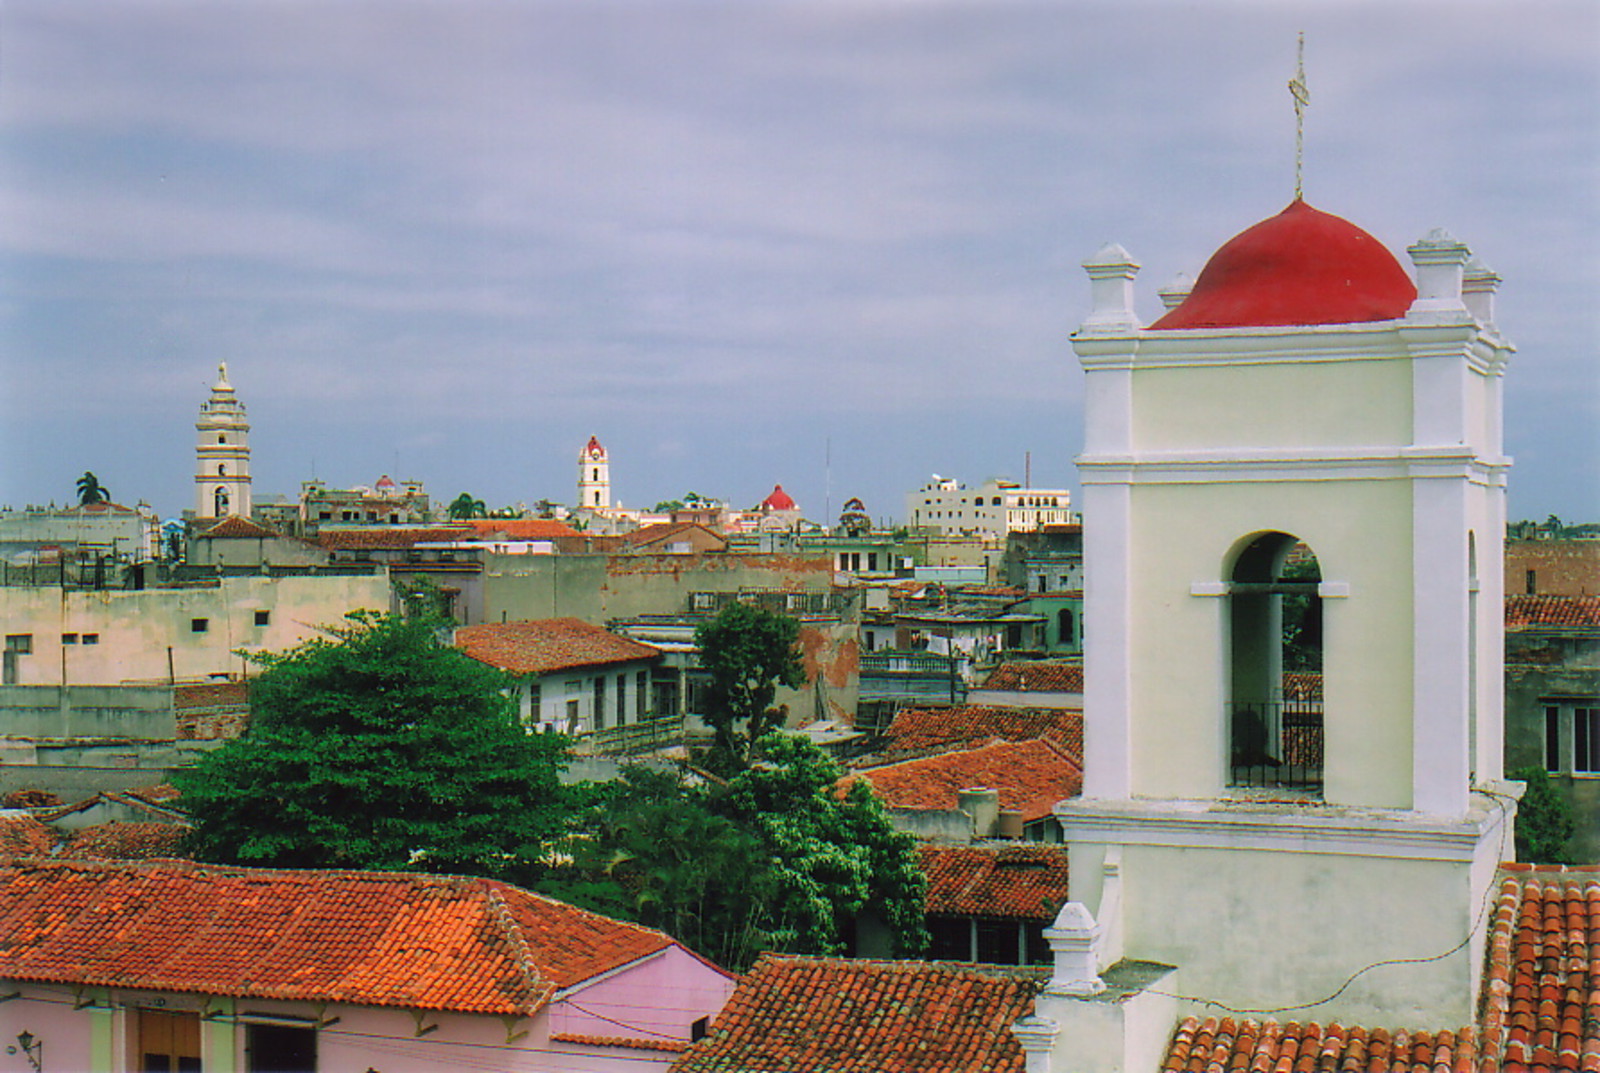 A view over Camagüey